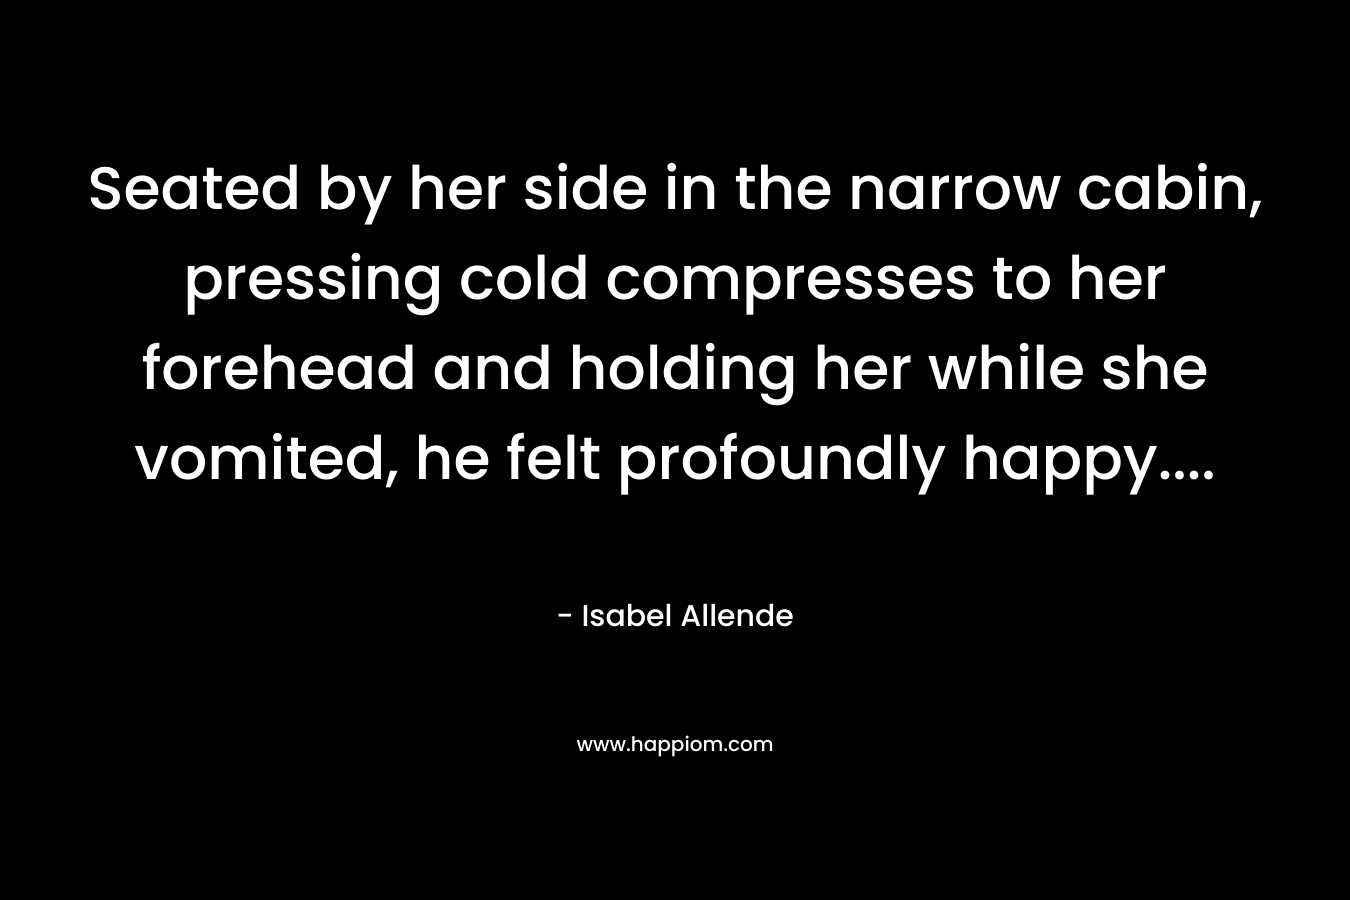 Seated by her side in the narrow cabin, pressing cold compresses to her forehead and holding her while she vomited, he felt profoundly happy…. – Isabel Allende